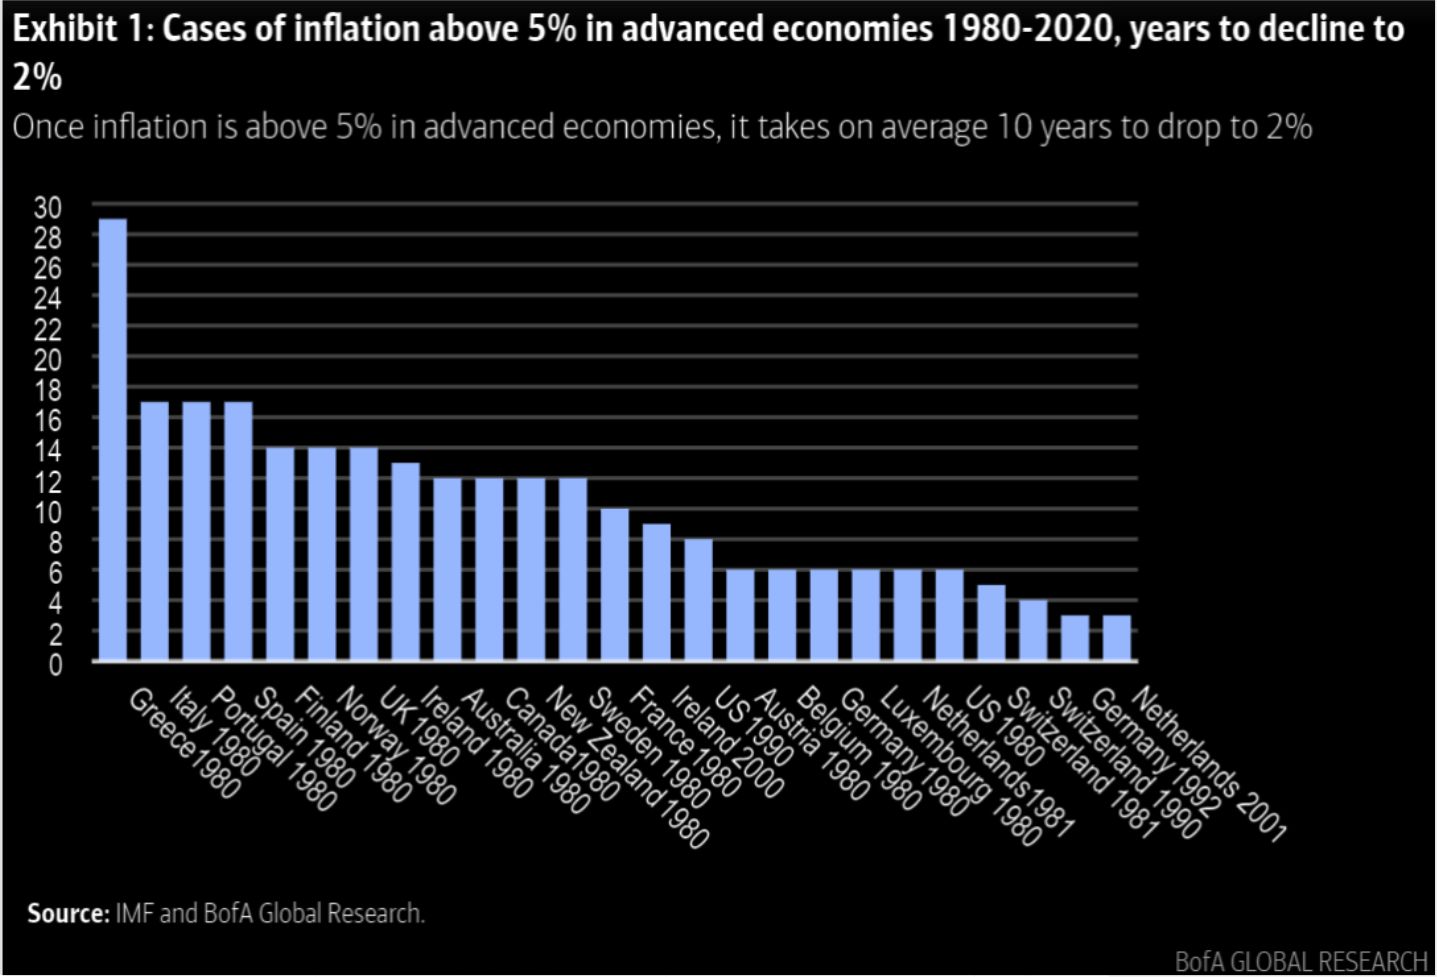 Once inflation is above 5% in advanced economies, it takes on average 10 years to drop to 2%